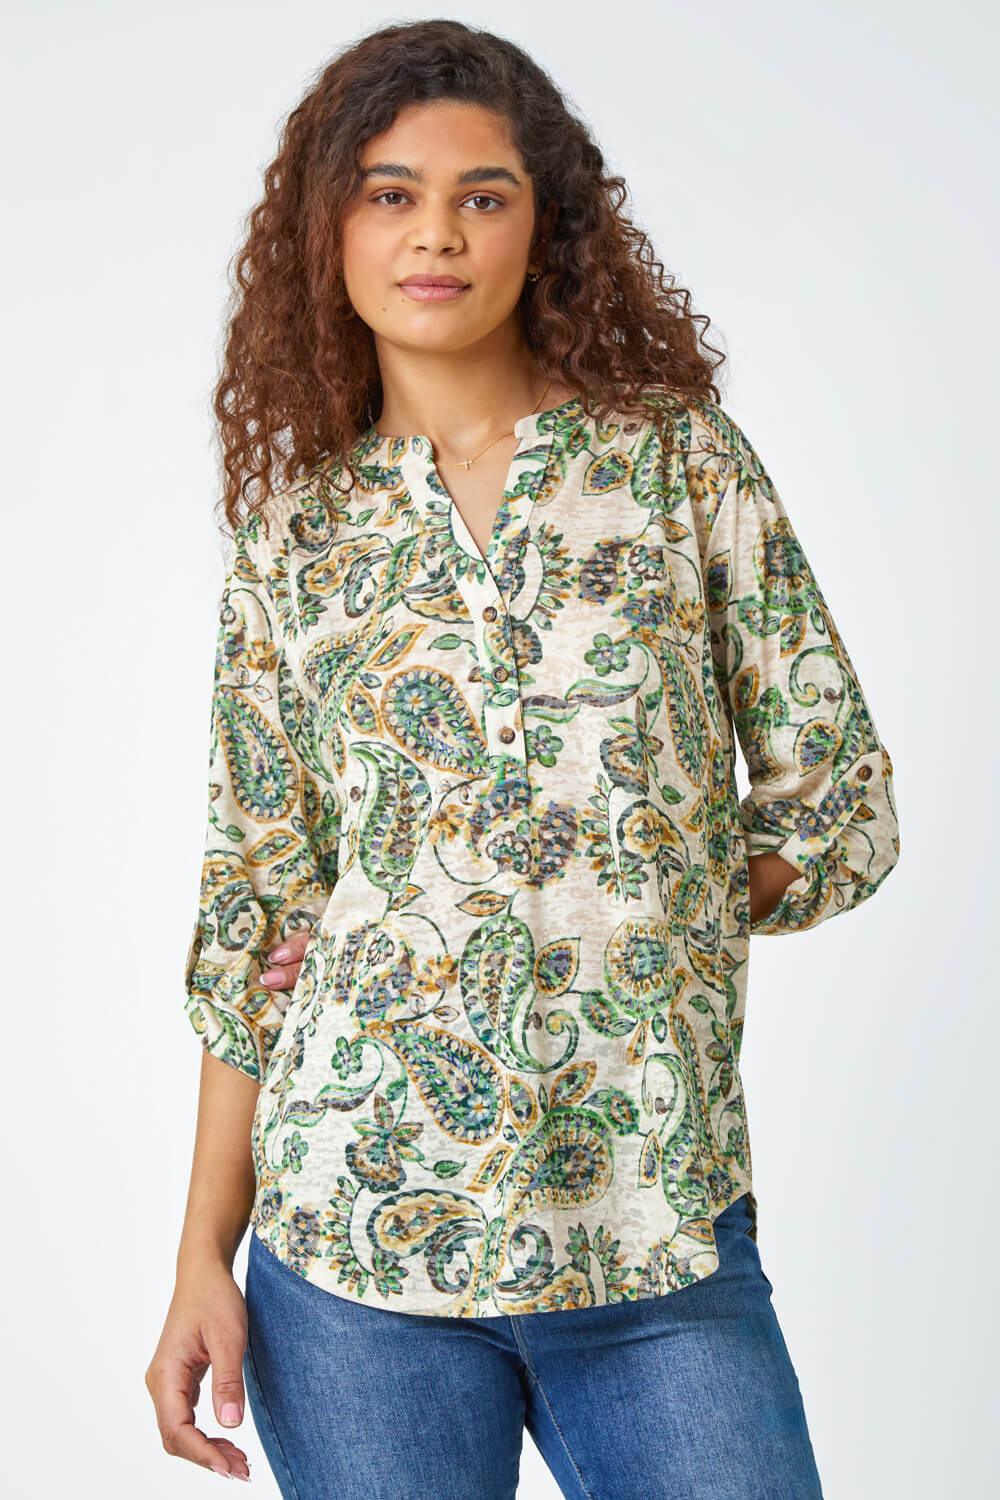 Green Paisley Stretch Jersey Top, Image 4 of 5